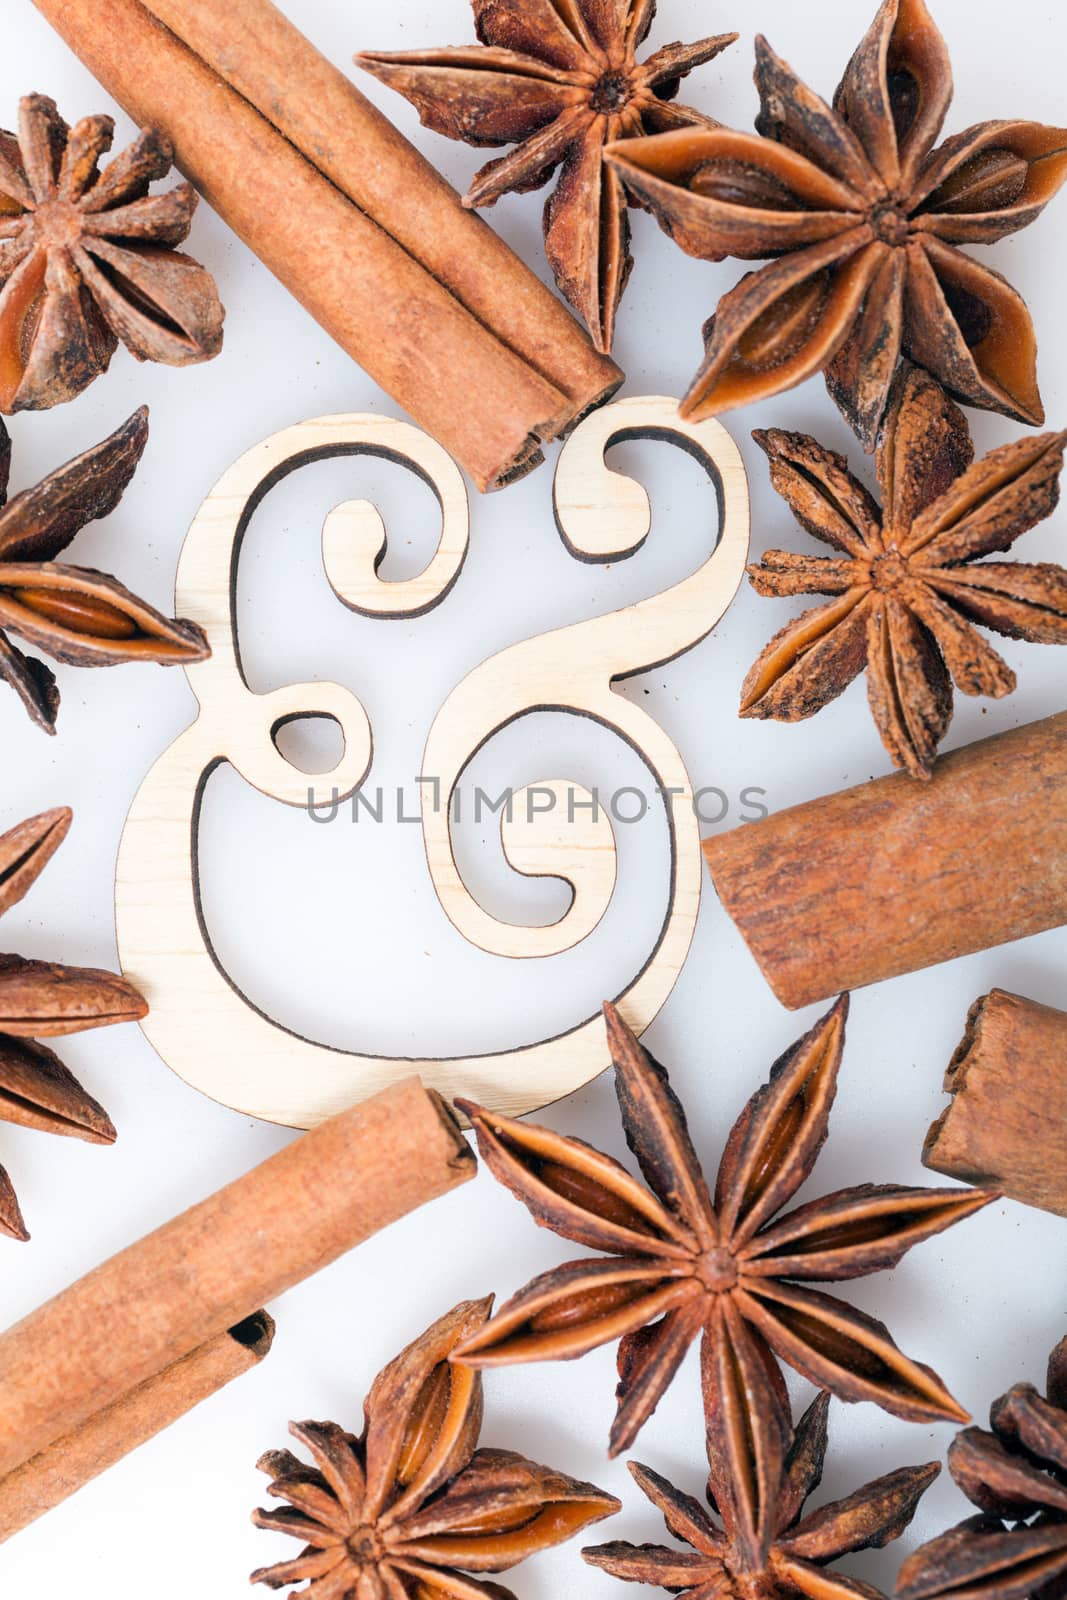 Cinnamon and star anise by Portokalis